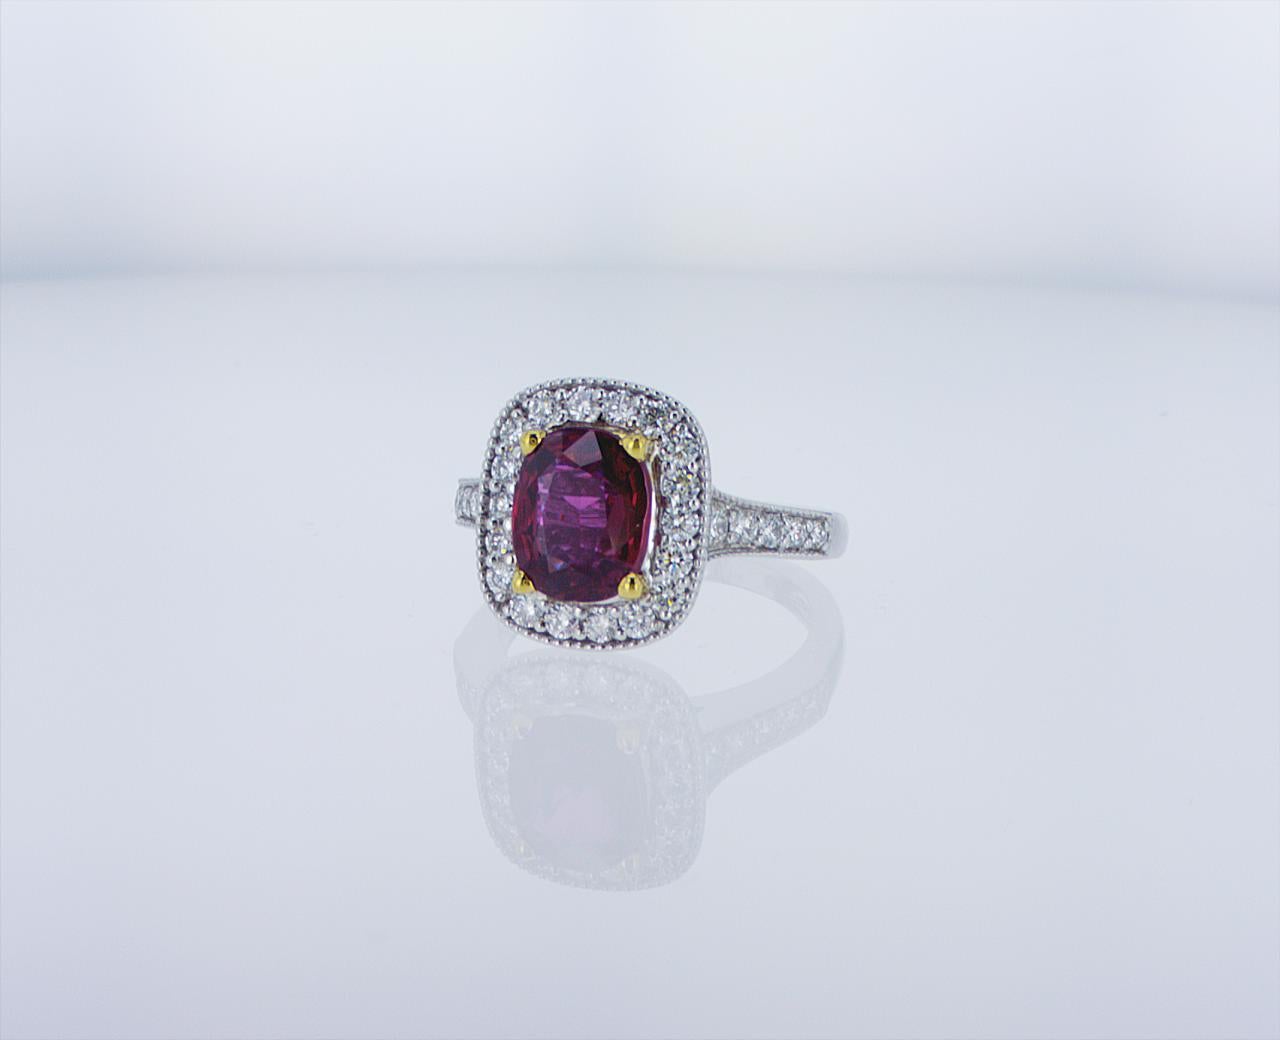 2.35ct Ruby Cocktail Ring featuring 0.82ct Total Weight of G/H Color VS Clarity Round Brilliant Diamonds in an 18k White Gold with Palladium Mounting with 18k Yellow Gold Center Prongs.
